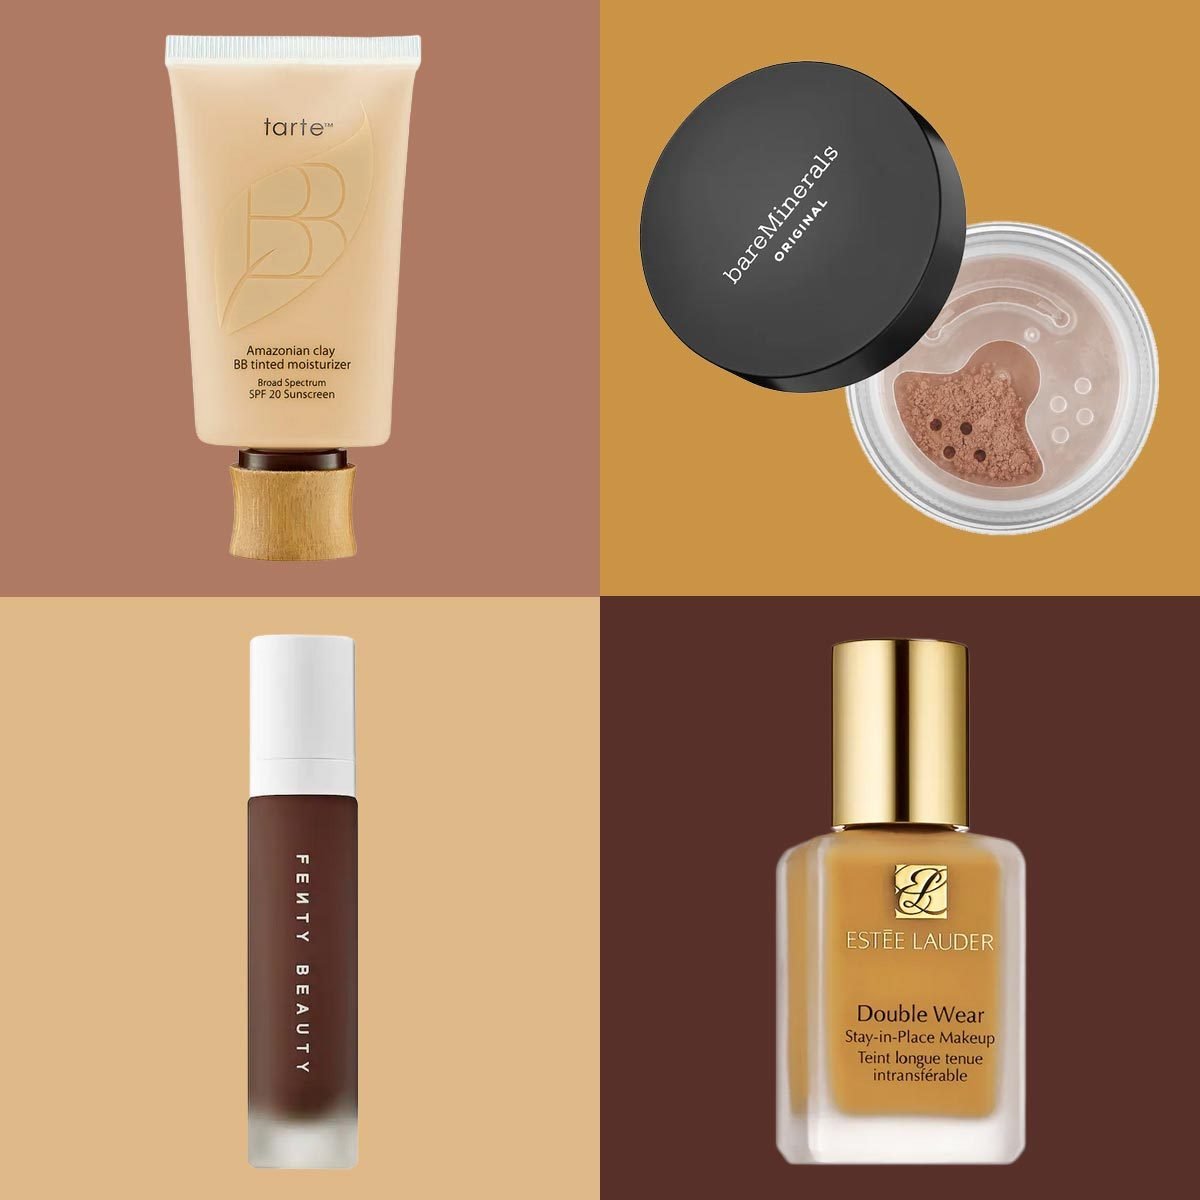 10 Best Foundations for Acne-Prone Skin 2022 Makeup for Breakouts